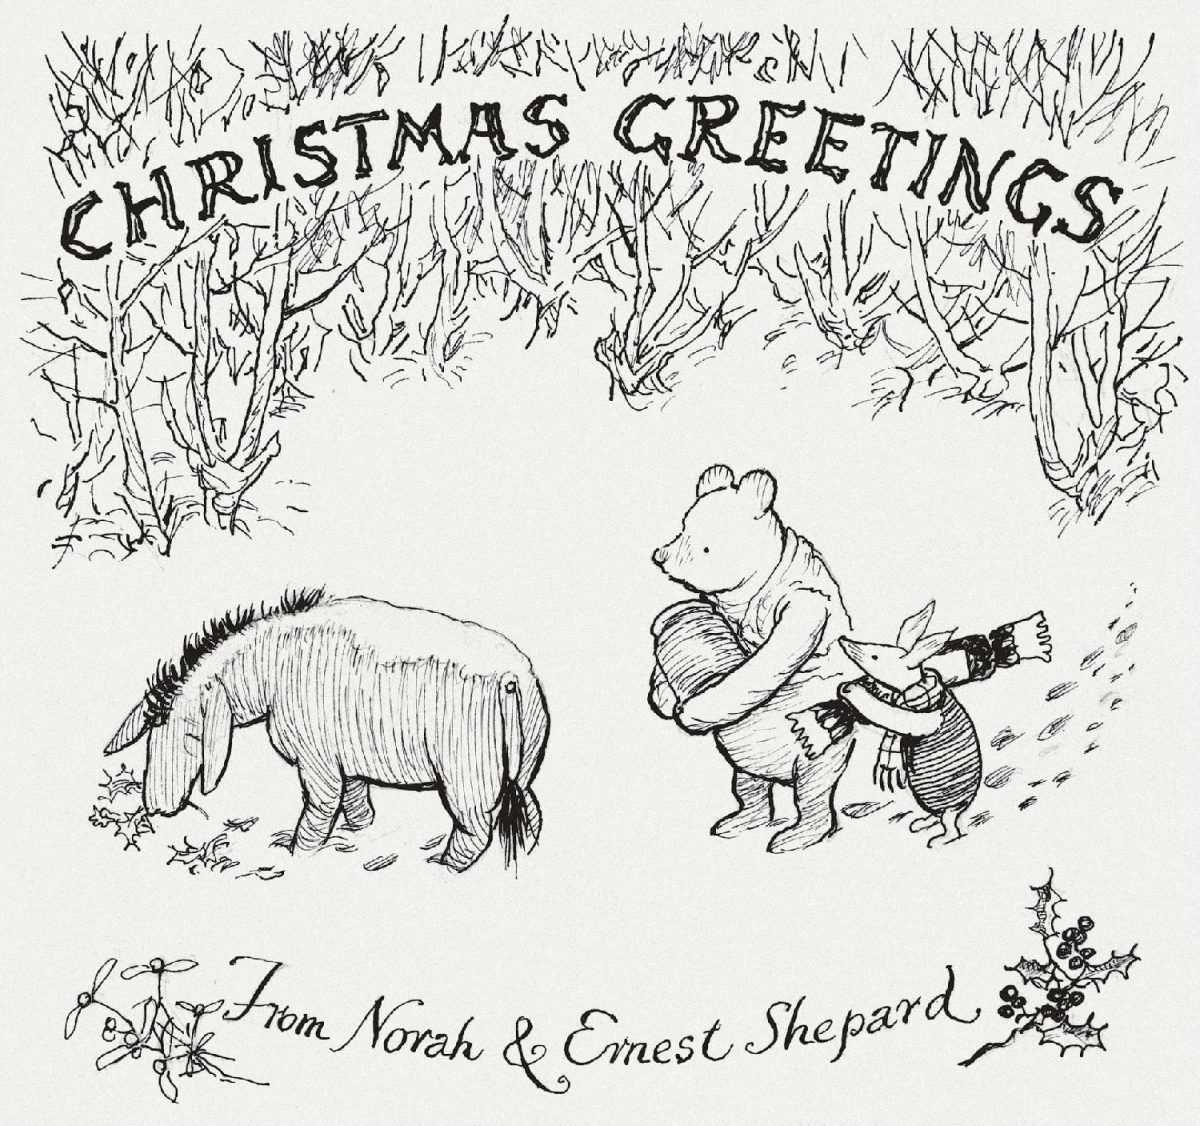 This illustration of Eeyore with holly, Pooh with a jar of honey and Piglet with a Christmas cracker comprises the original illustration for the only known Christmas card